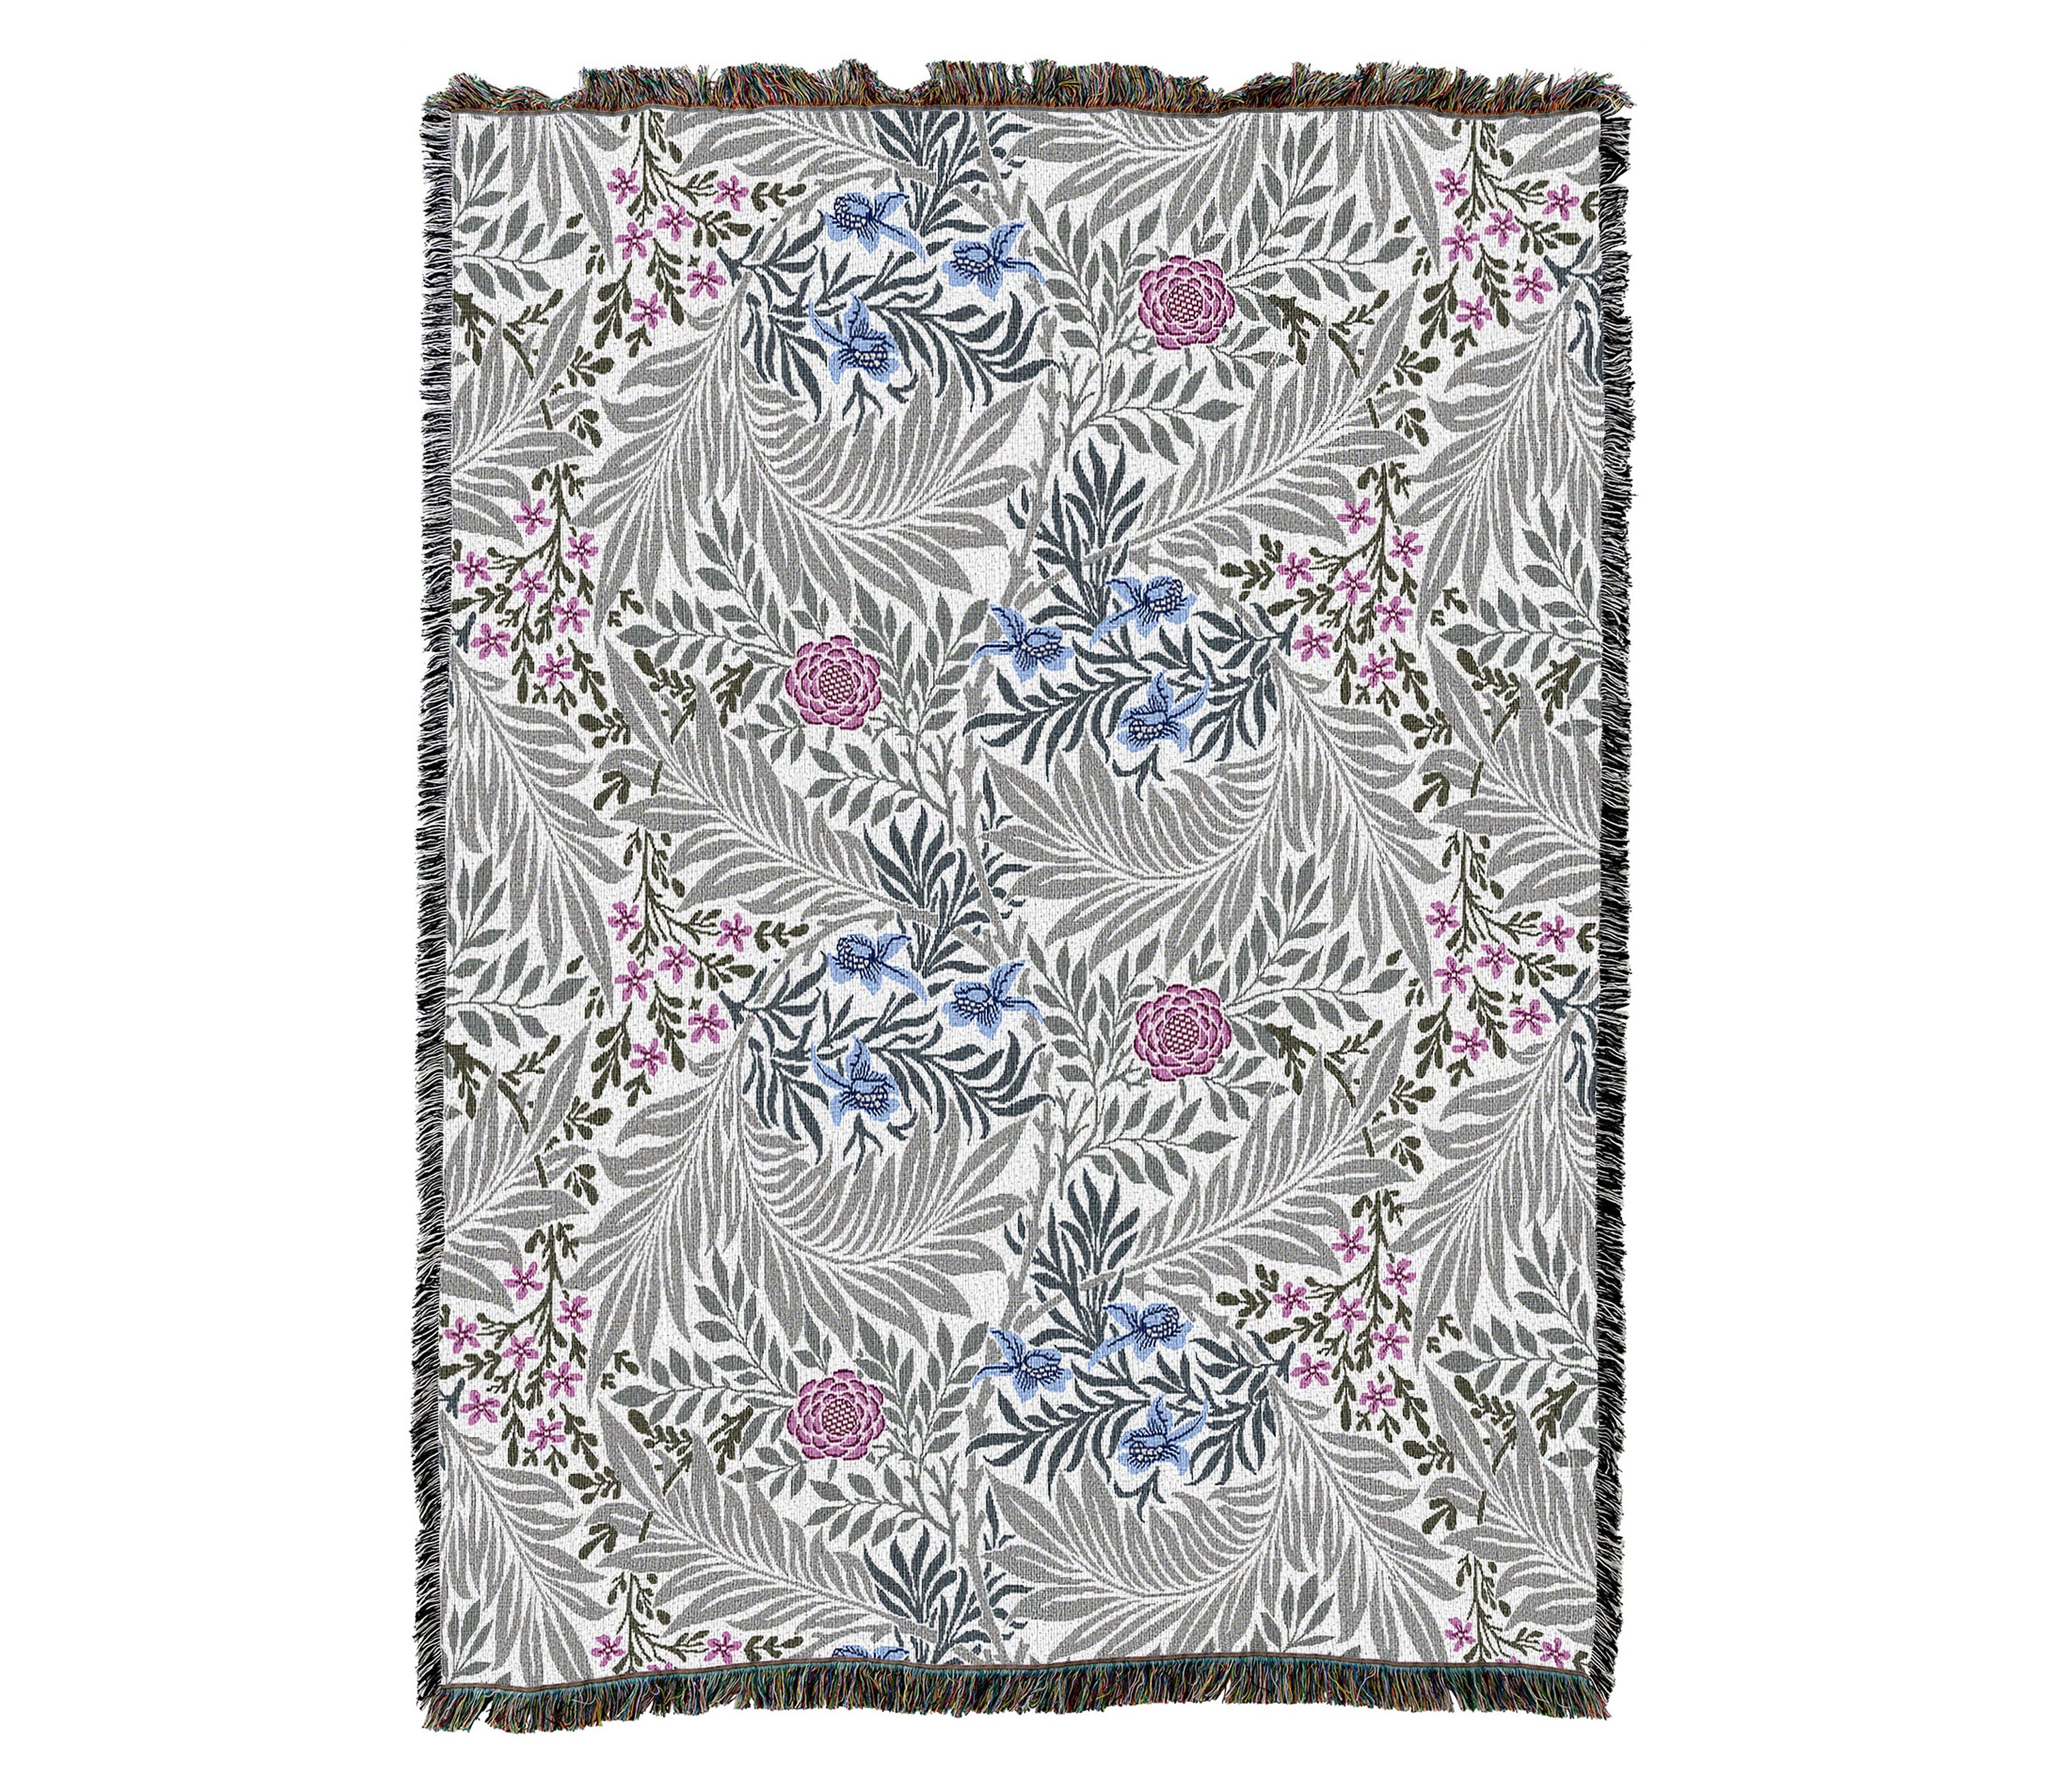 Pure Country Weavers William Morris Larkspur Blanket Arts ＆ Crafts Gift  Tapestry Throw Woven from Cotton Made in The USA (72x54) 